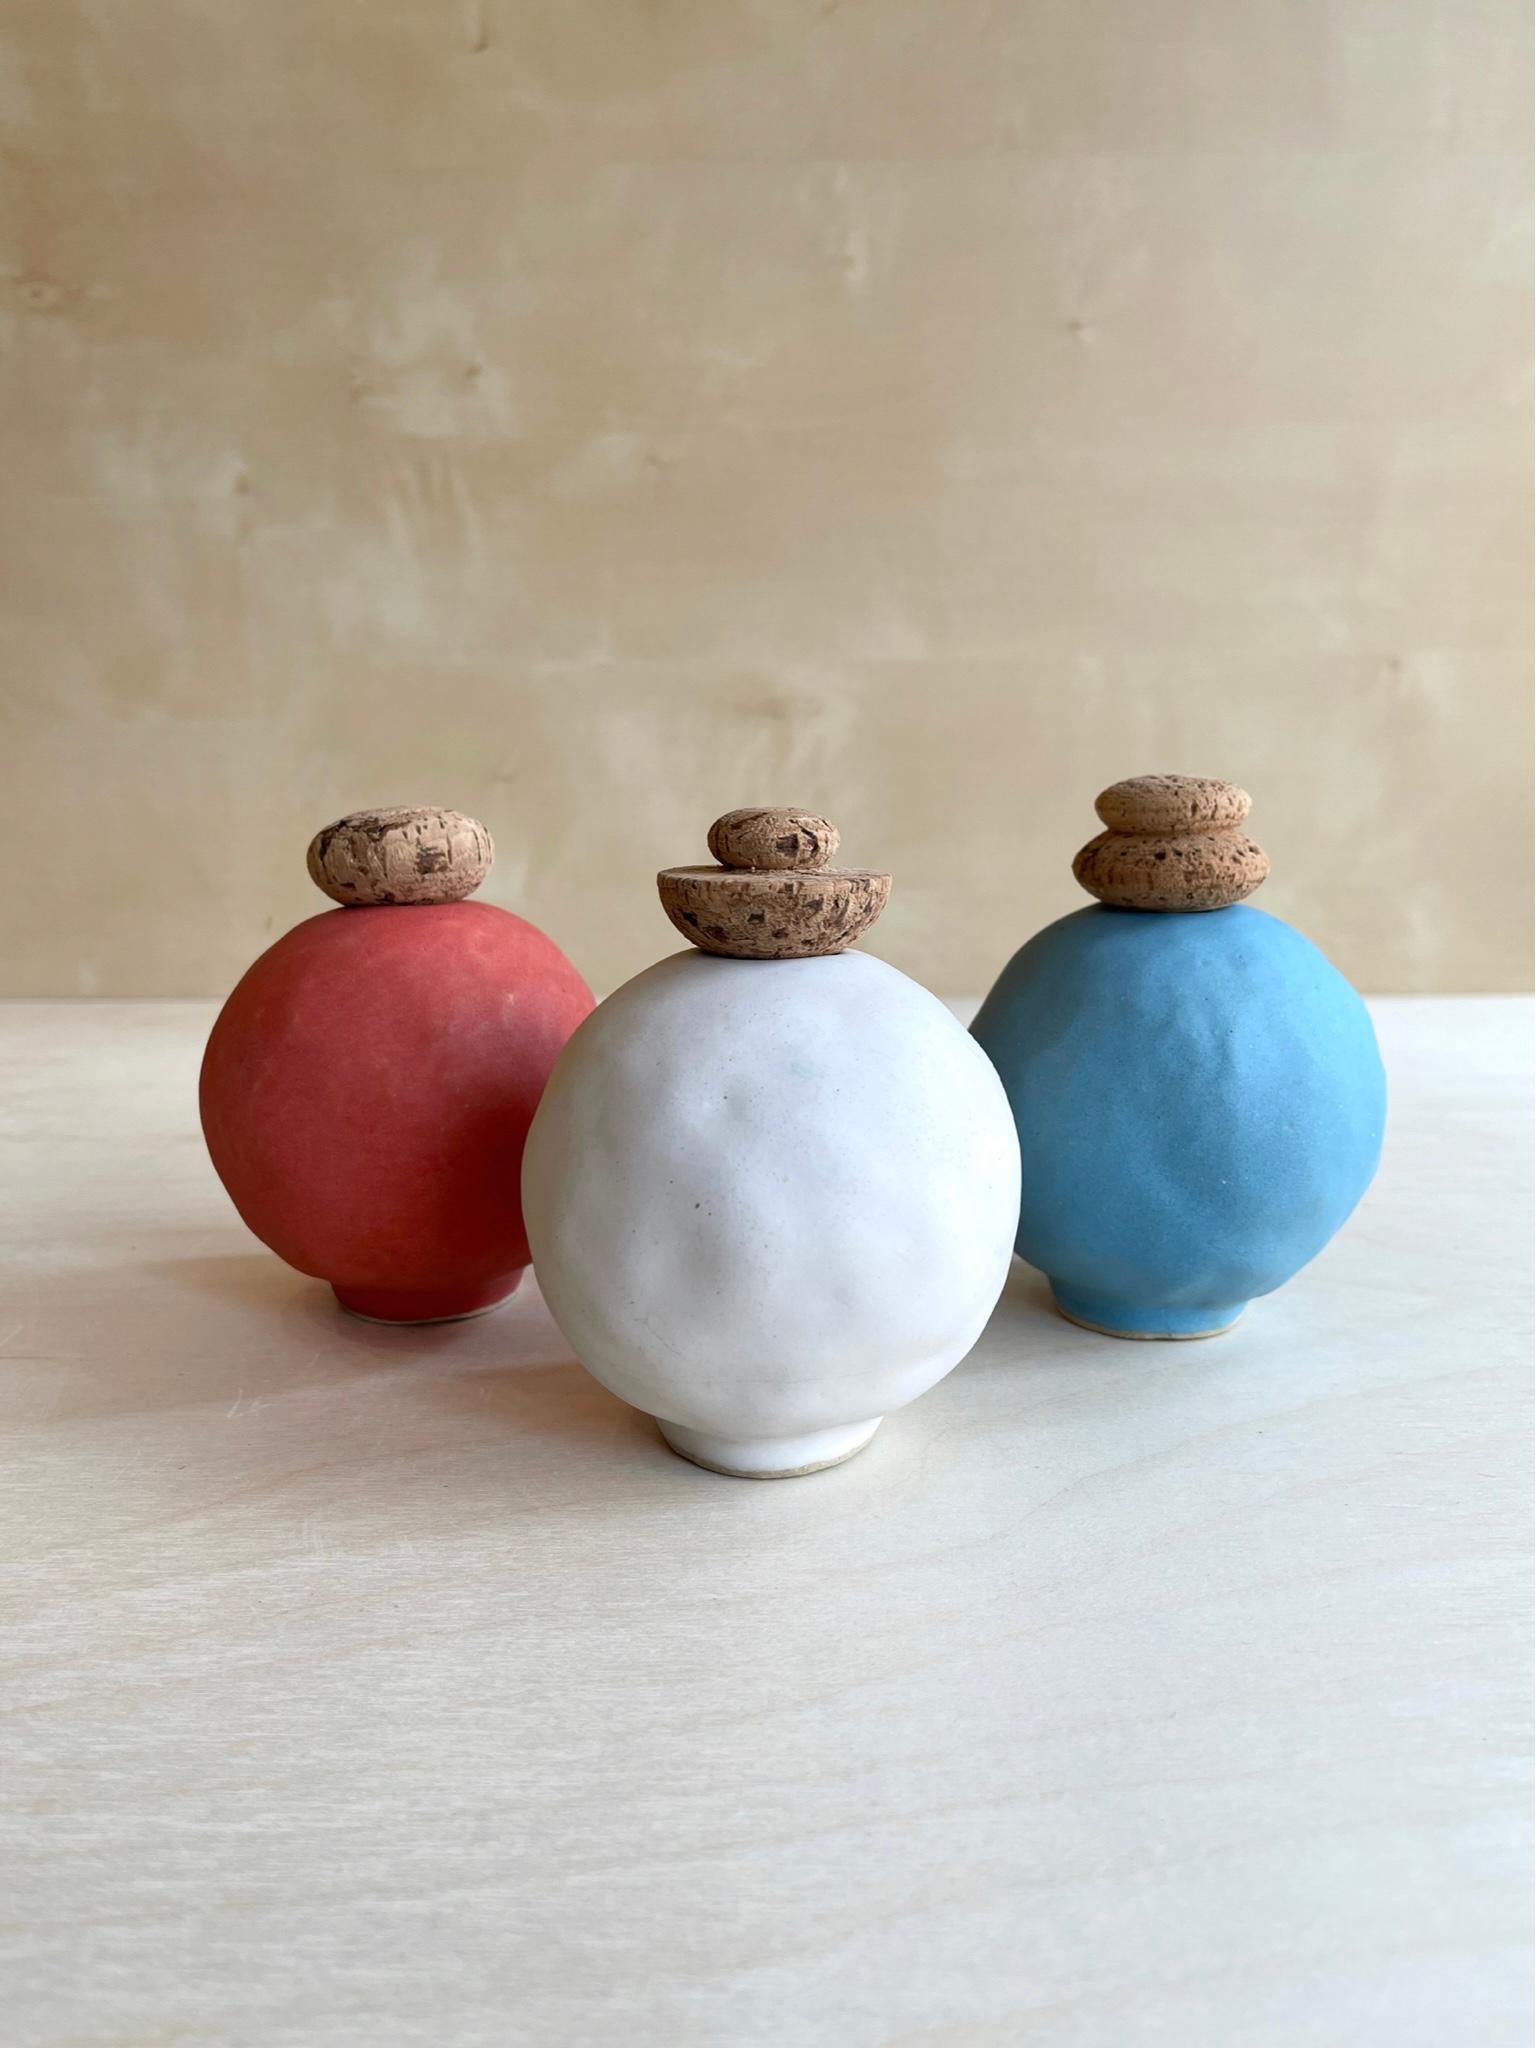 Set of 3 Edwina vases by Meg Morrison
One of a kind.
Materials: Ceramic, cork.
Dimensions: Ø 10 x H 13 cm (each).

All sizes are approximate. Although vases are watertight condensation may form on the bottom. Please protect delicate surfaces.